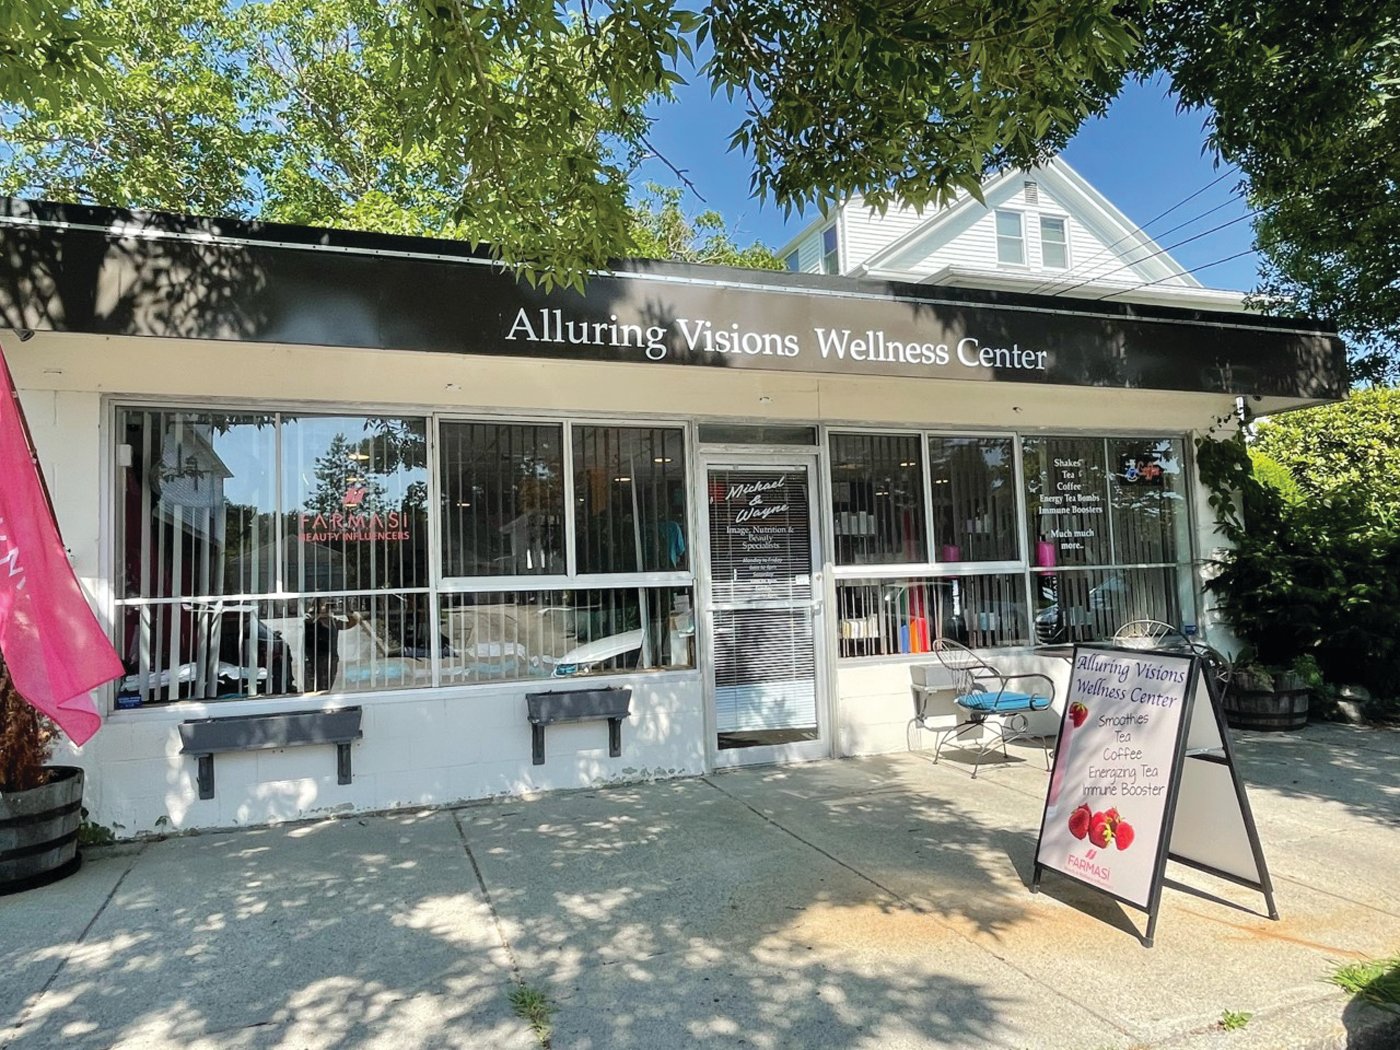 Alluring Visions Wellness Center, seen here at 1563 Cranston Street, is the only retail store in the USA which sells the internationally-known FARMASI products. Come enjoy an energizing tea or flavored shake while you learn more about these ground-breaking products.